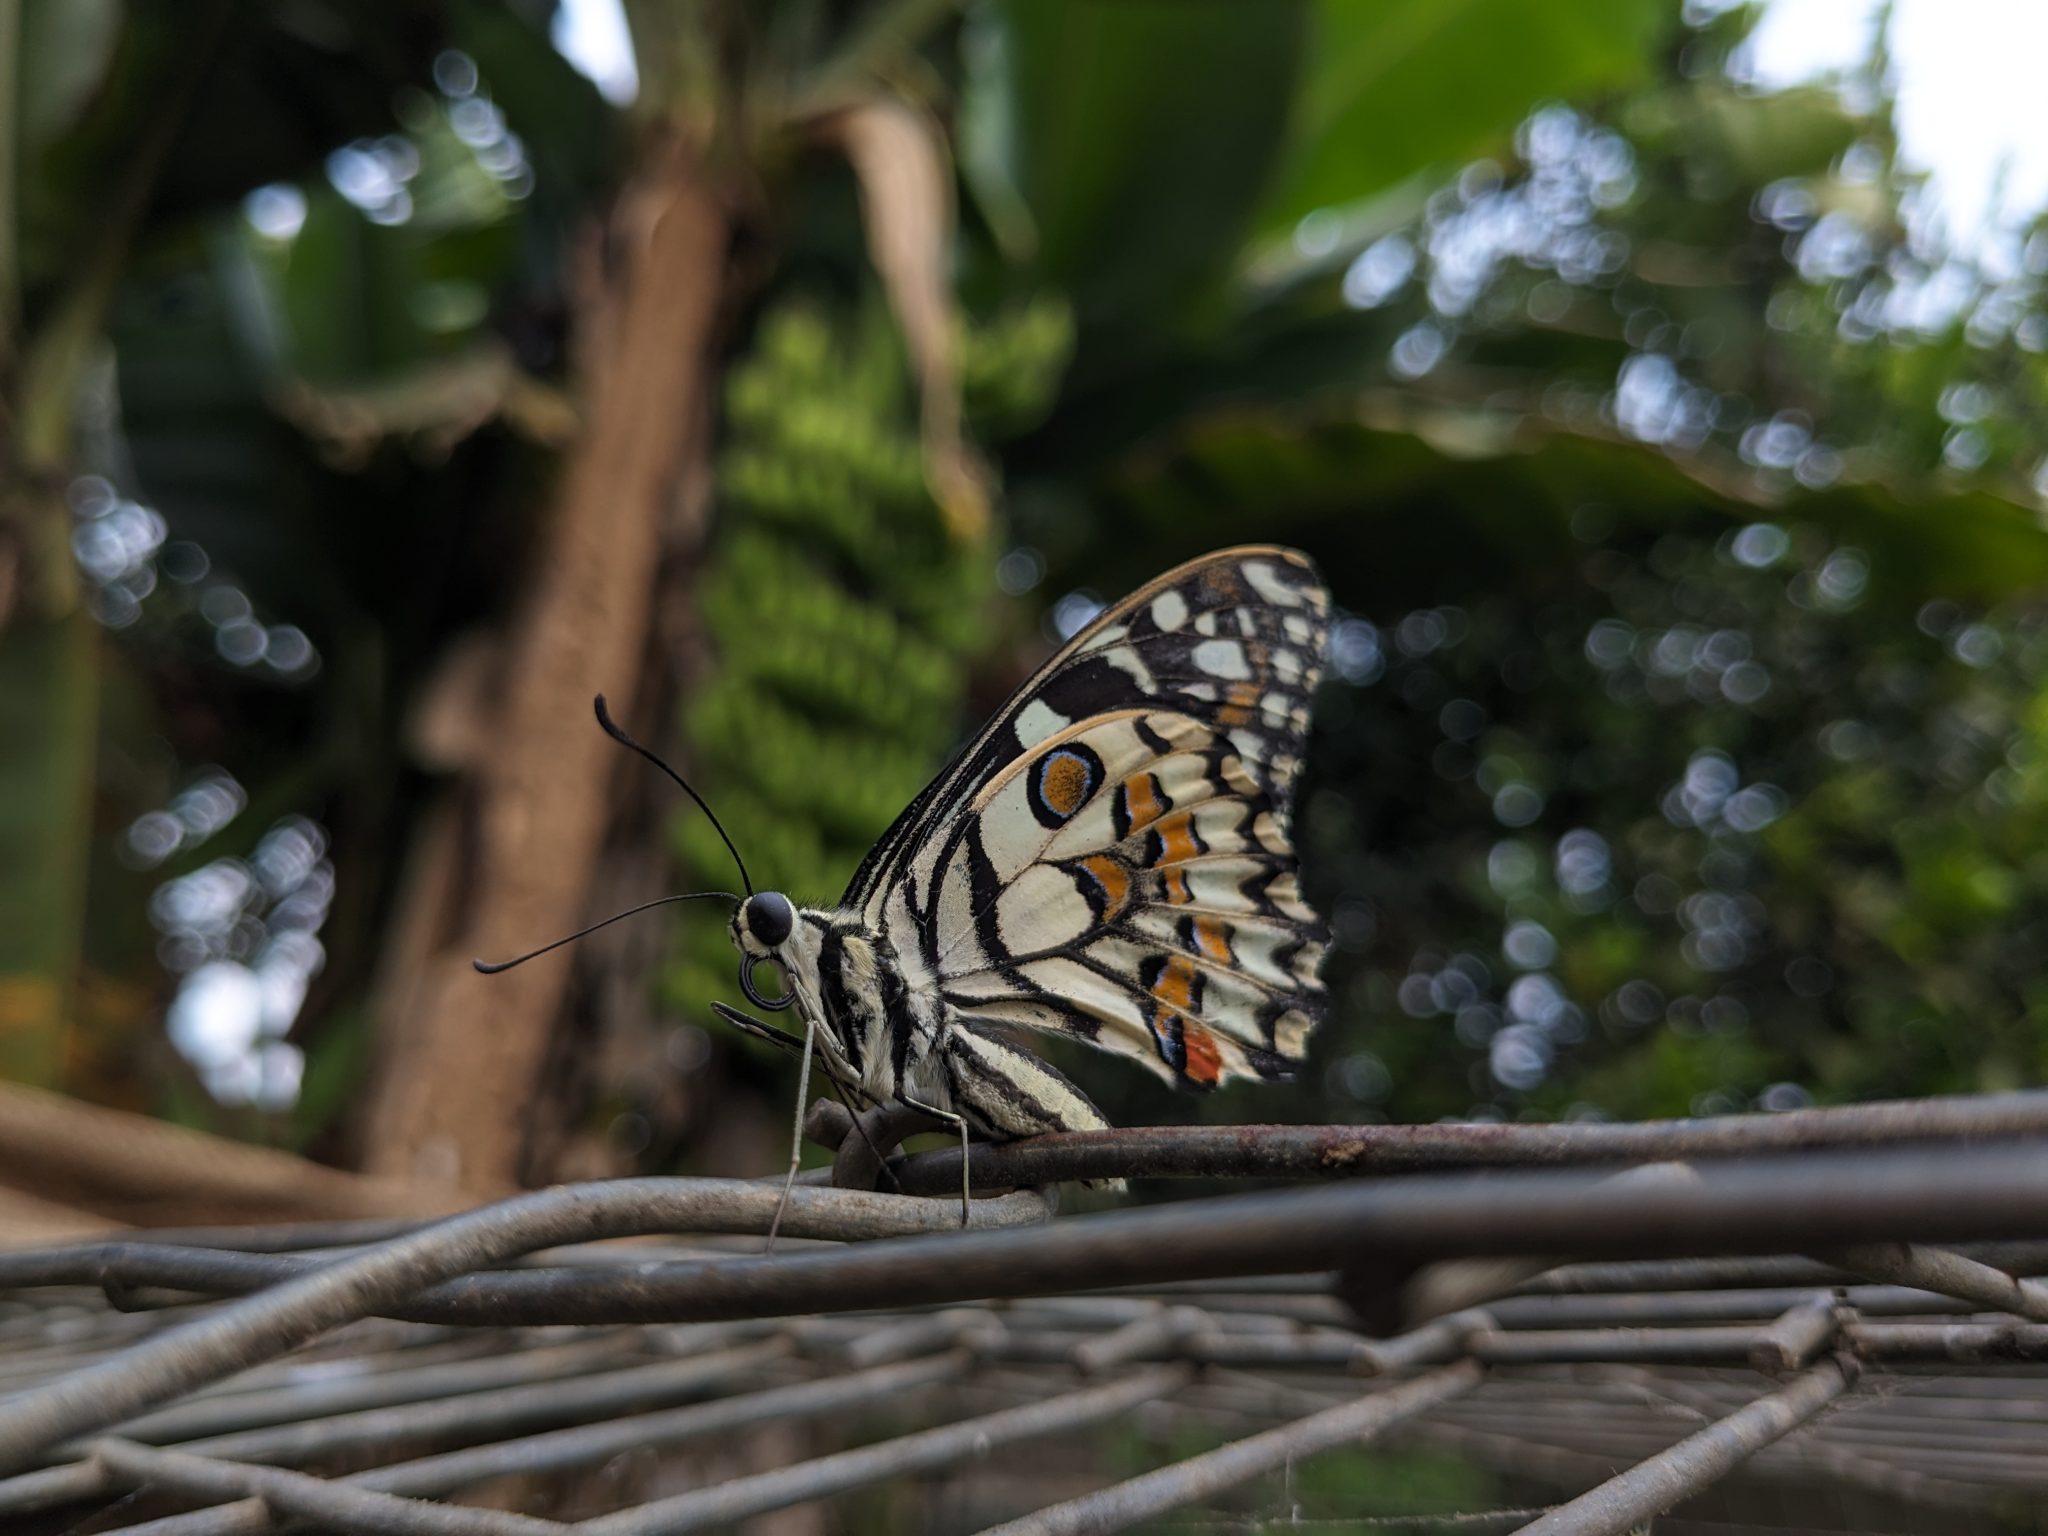 A close-up photo of a butterfly perched on a metal wire, showcasing its detailed wing patterns and colors. The background is a blurred view of green foliage and a tree trunk, providing a natural setting.